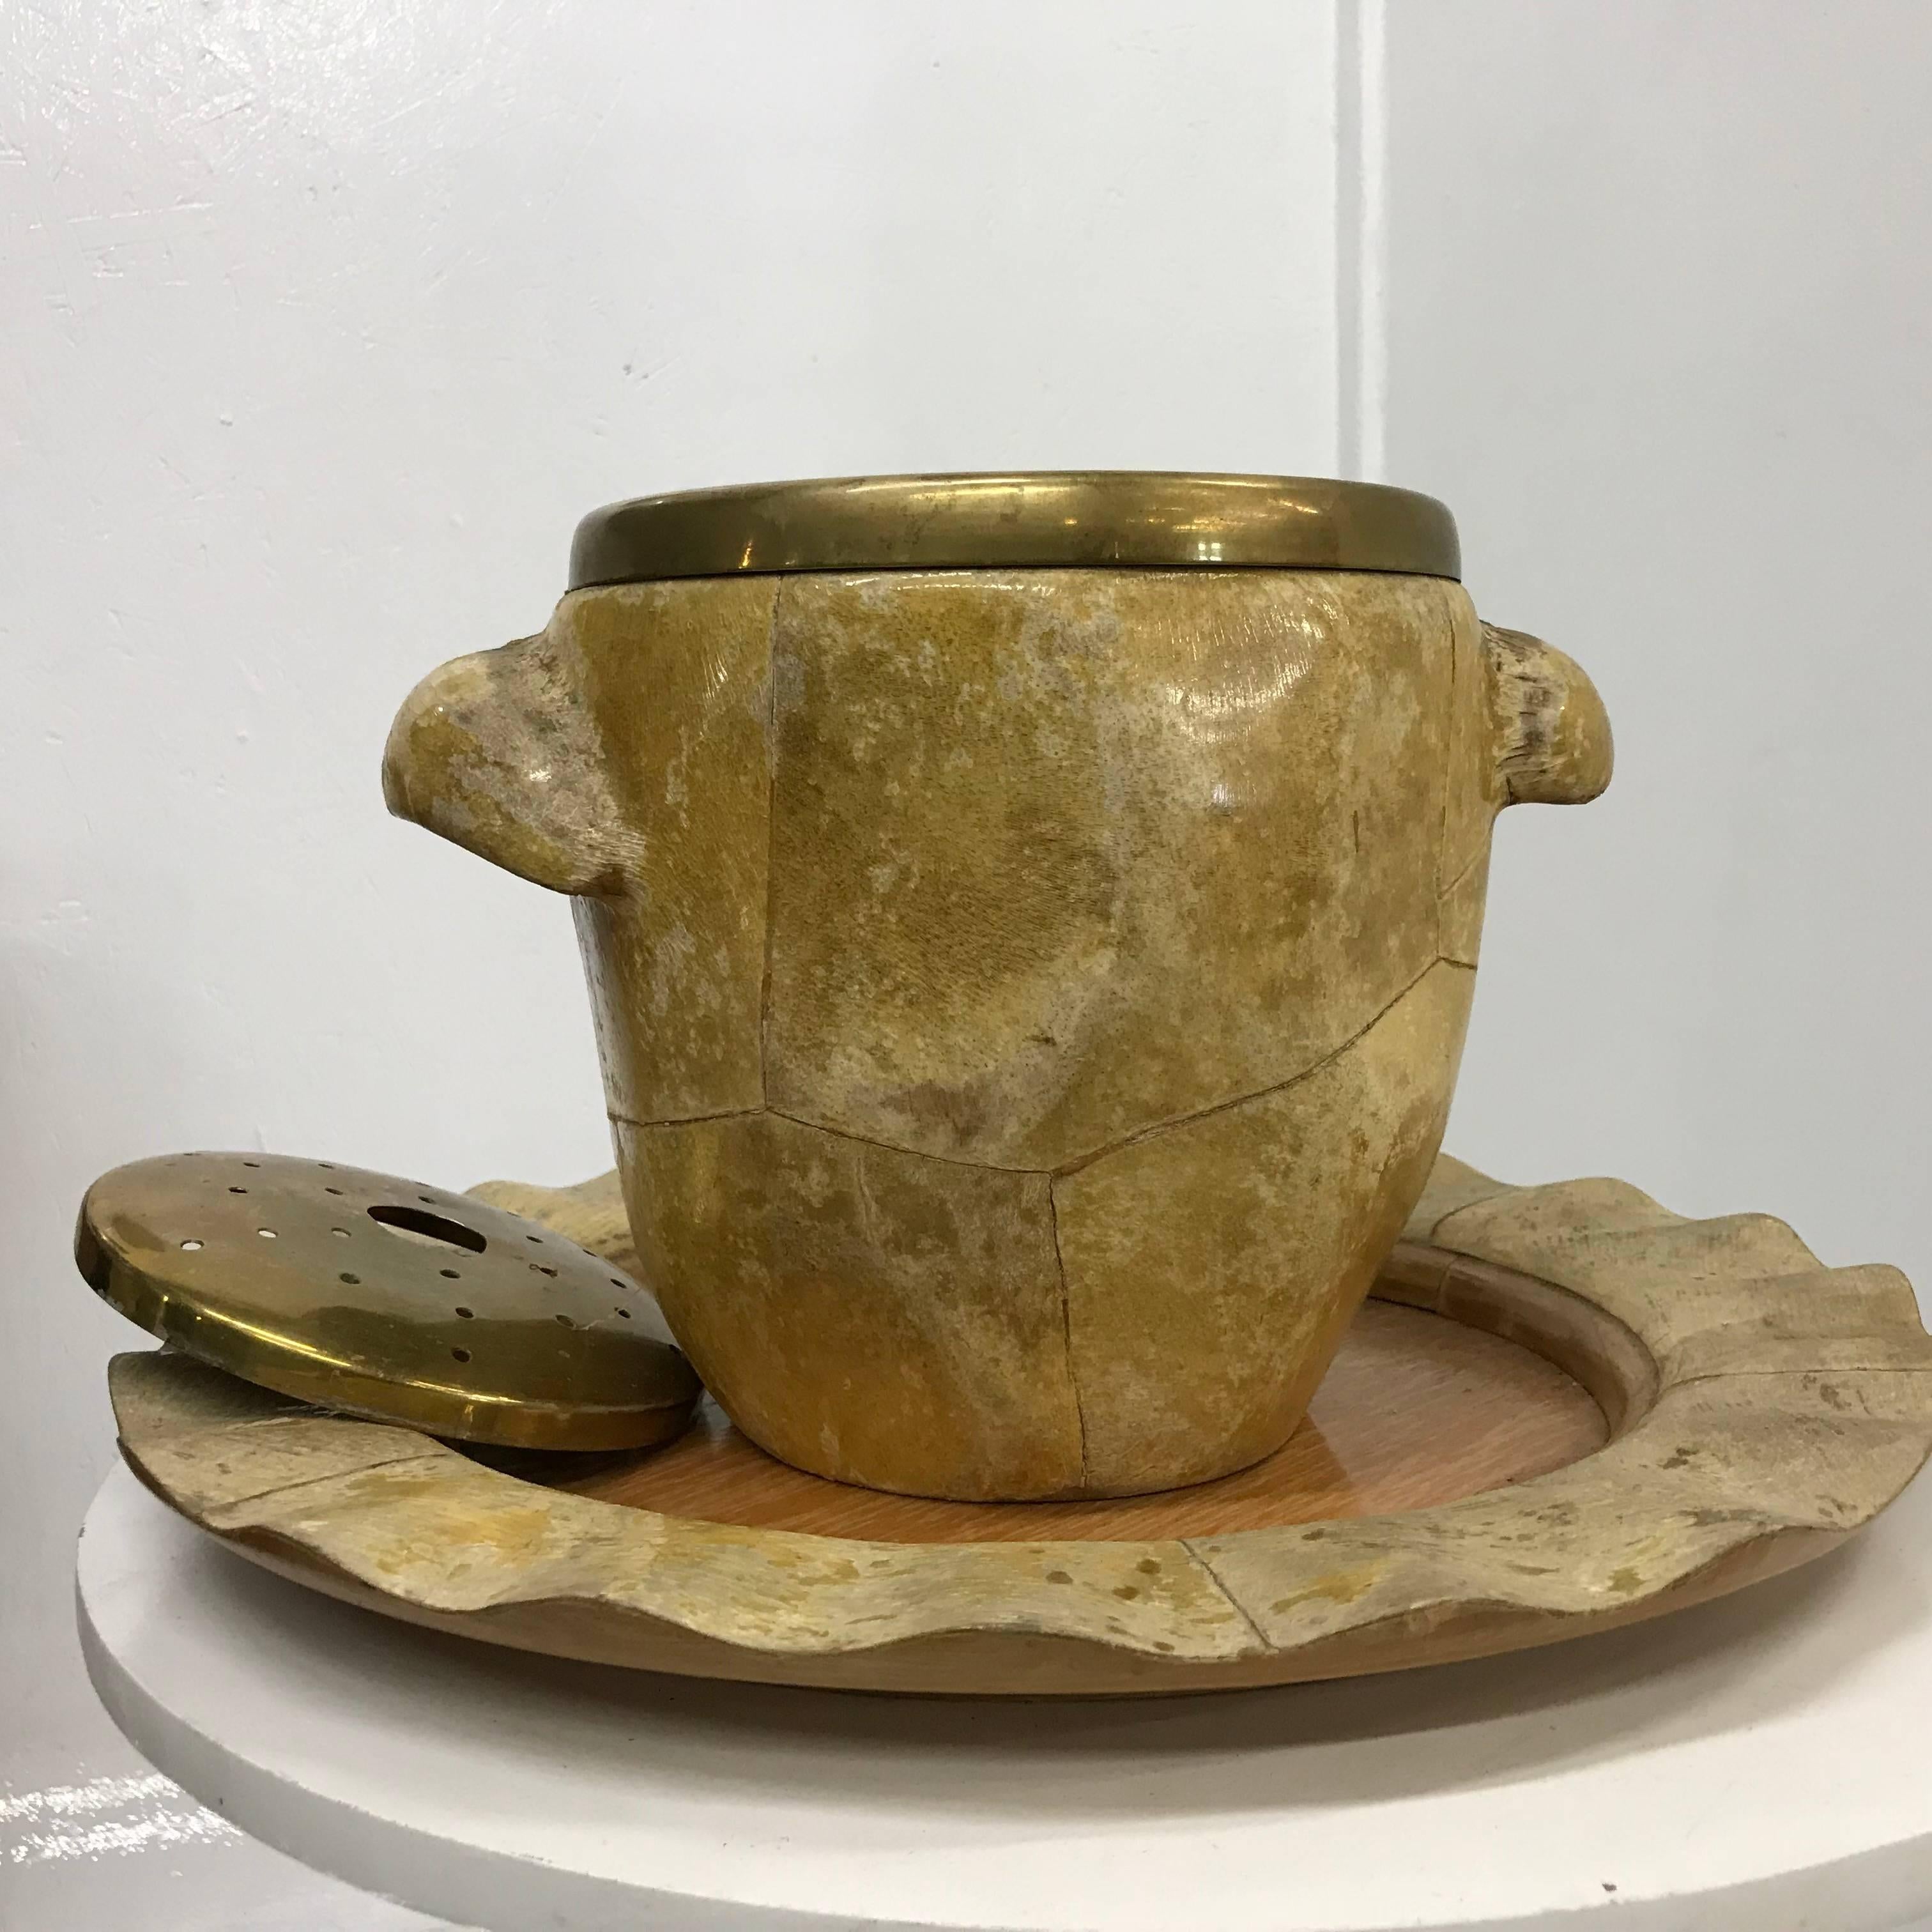 A beautiful goatskin, wood and brass serving set by Aldo Tura Macabo Cusano.
Comprising of an ice bucket/champagne holder and a beautiful scalloped wooden tray,
circa 1950s. 
Beautiful original distressed condition.
Measures:
Ice Bucket 11